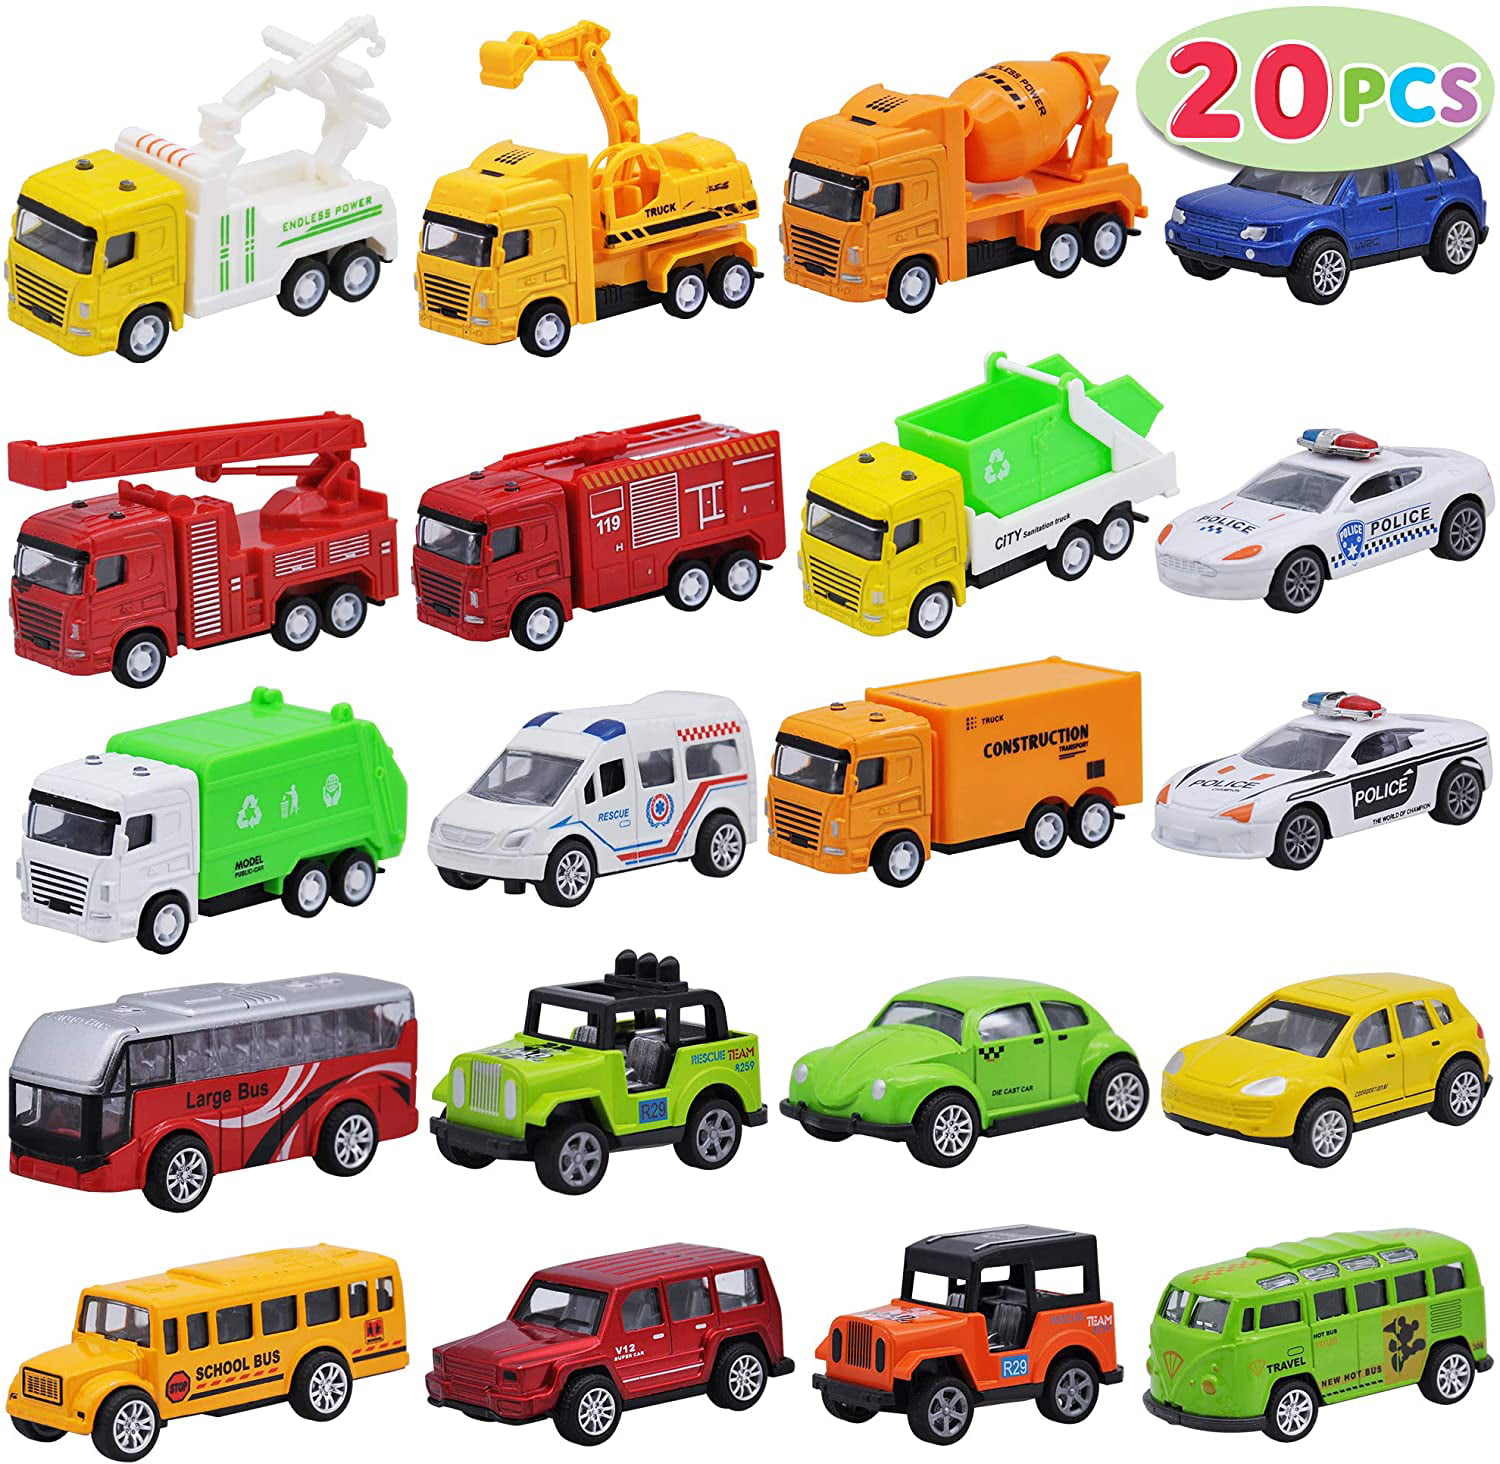 Jasnyfall multi-color mixed Pull Back Engineering Model Car Diecast Car Toy Vehicles Toy Cars For Children 